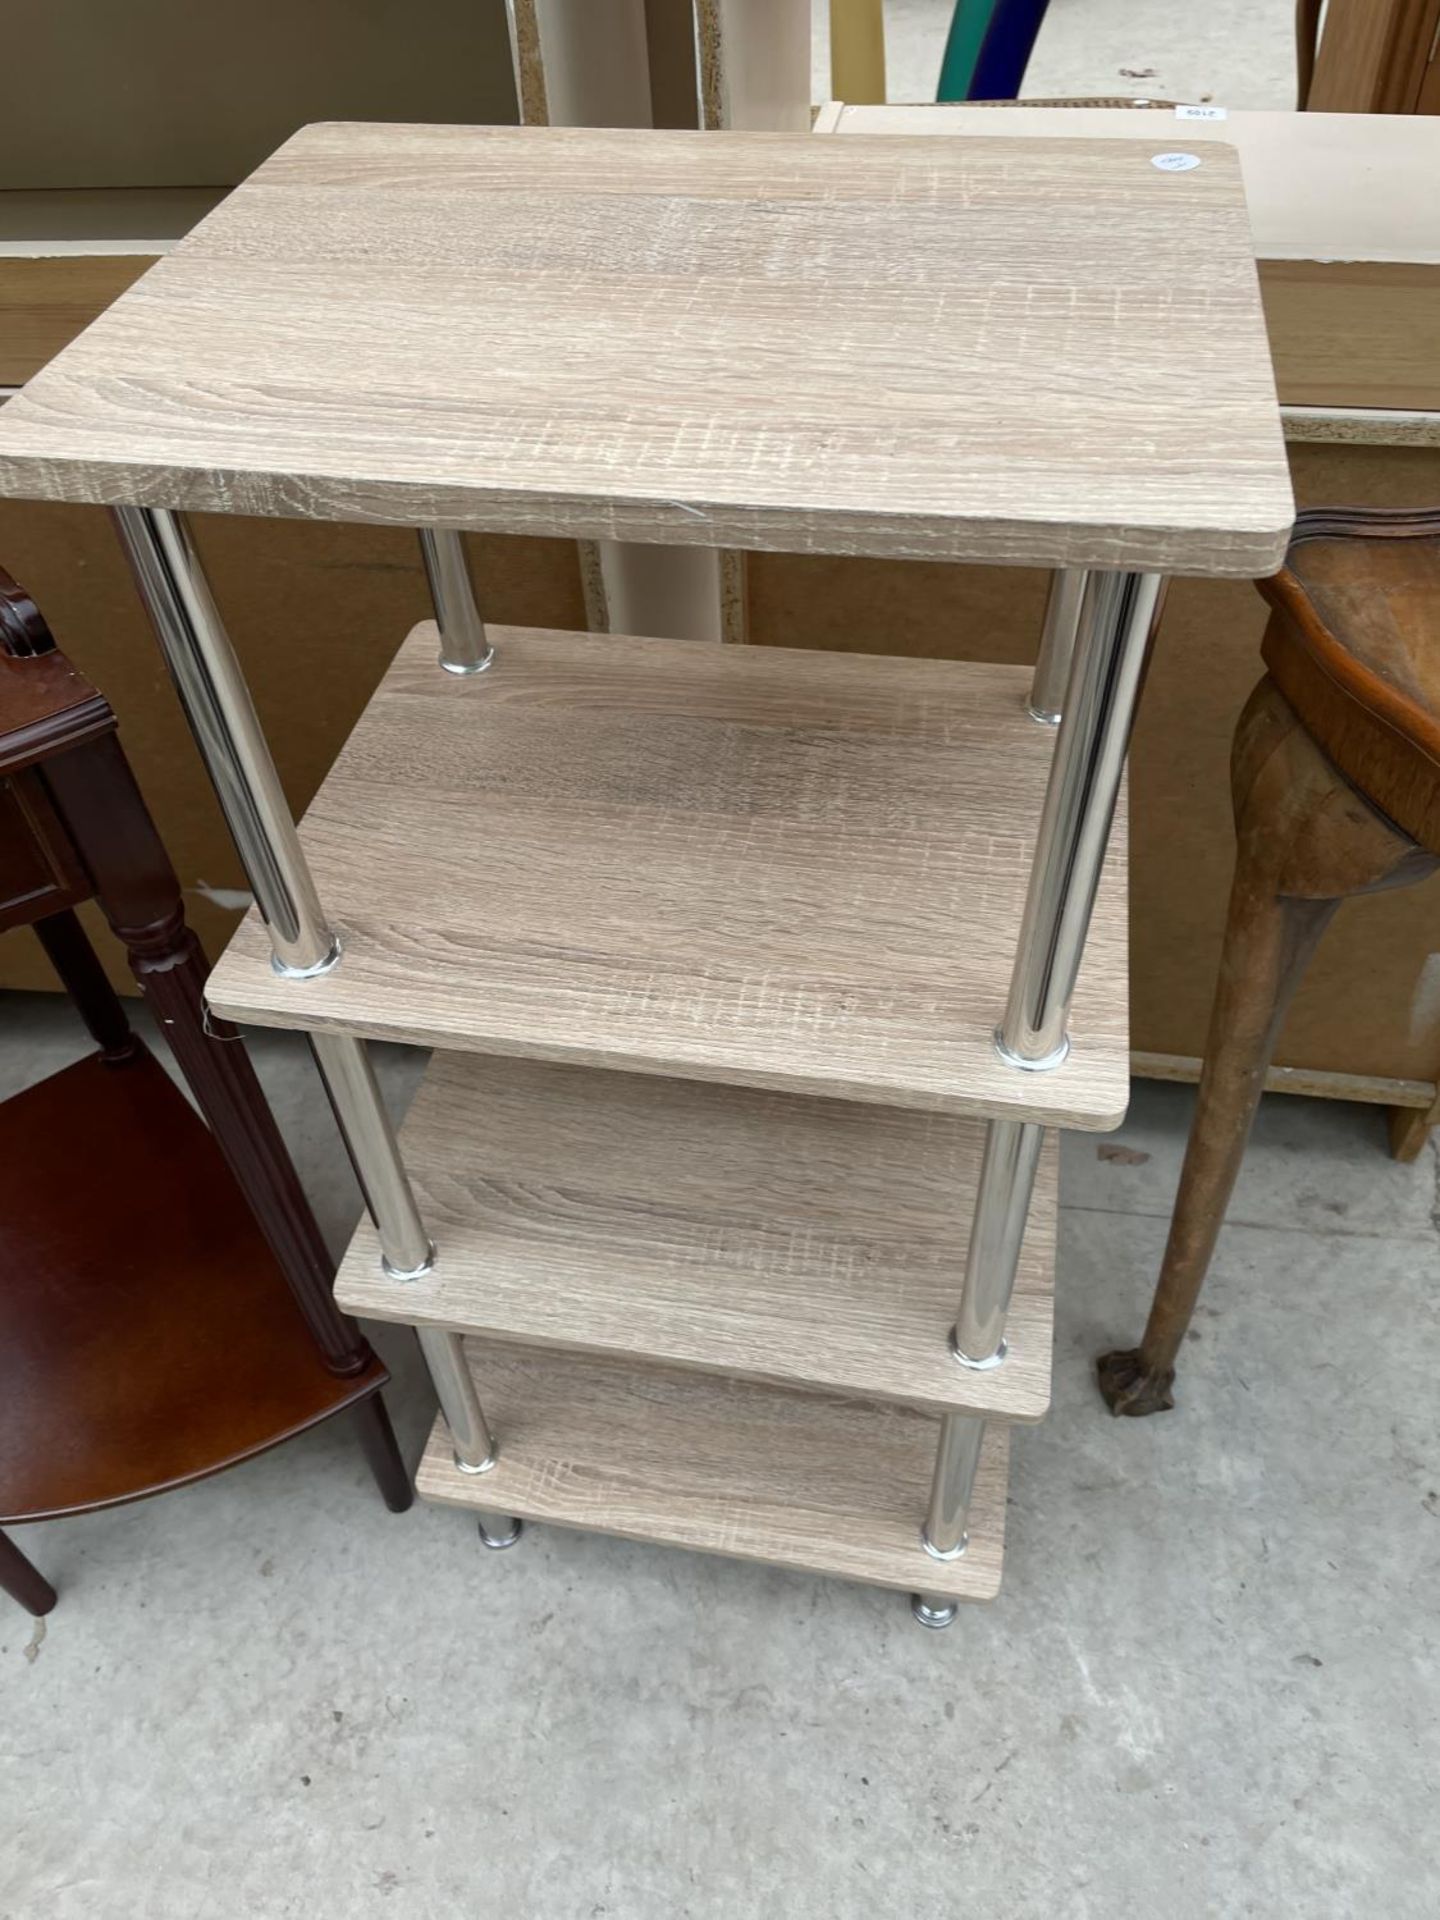 A MODERN CORNER STAND WITH TWO SHAM DRAWERS, FOUR TIER OPEN STAND - Image 5 of 5